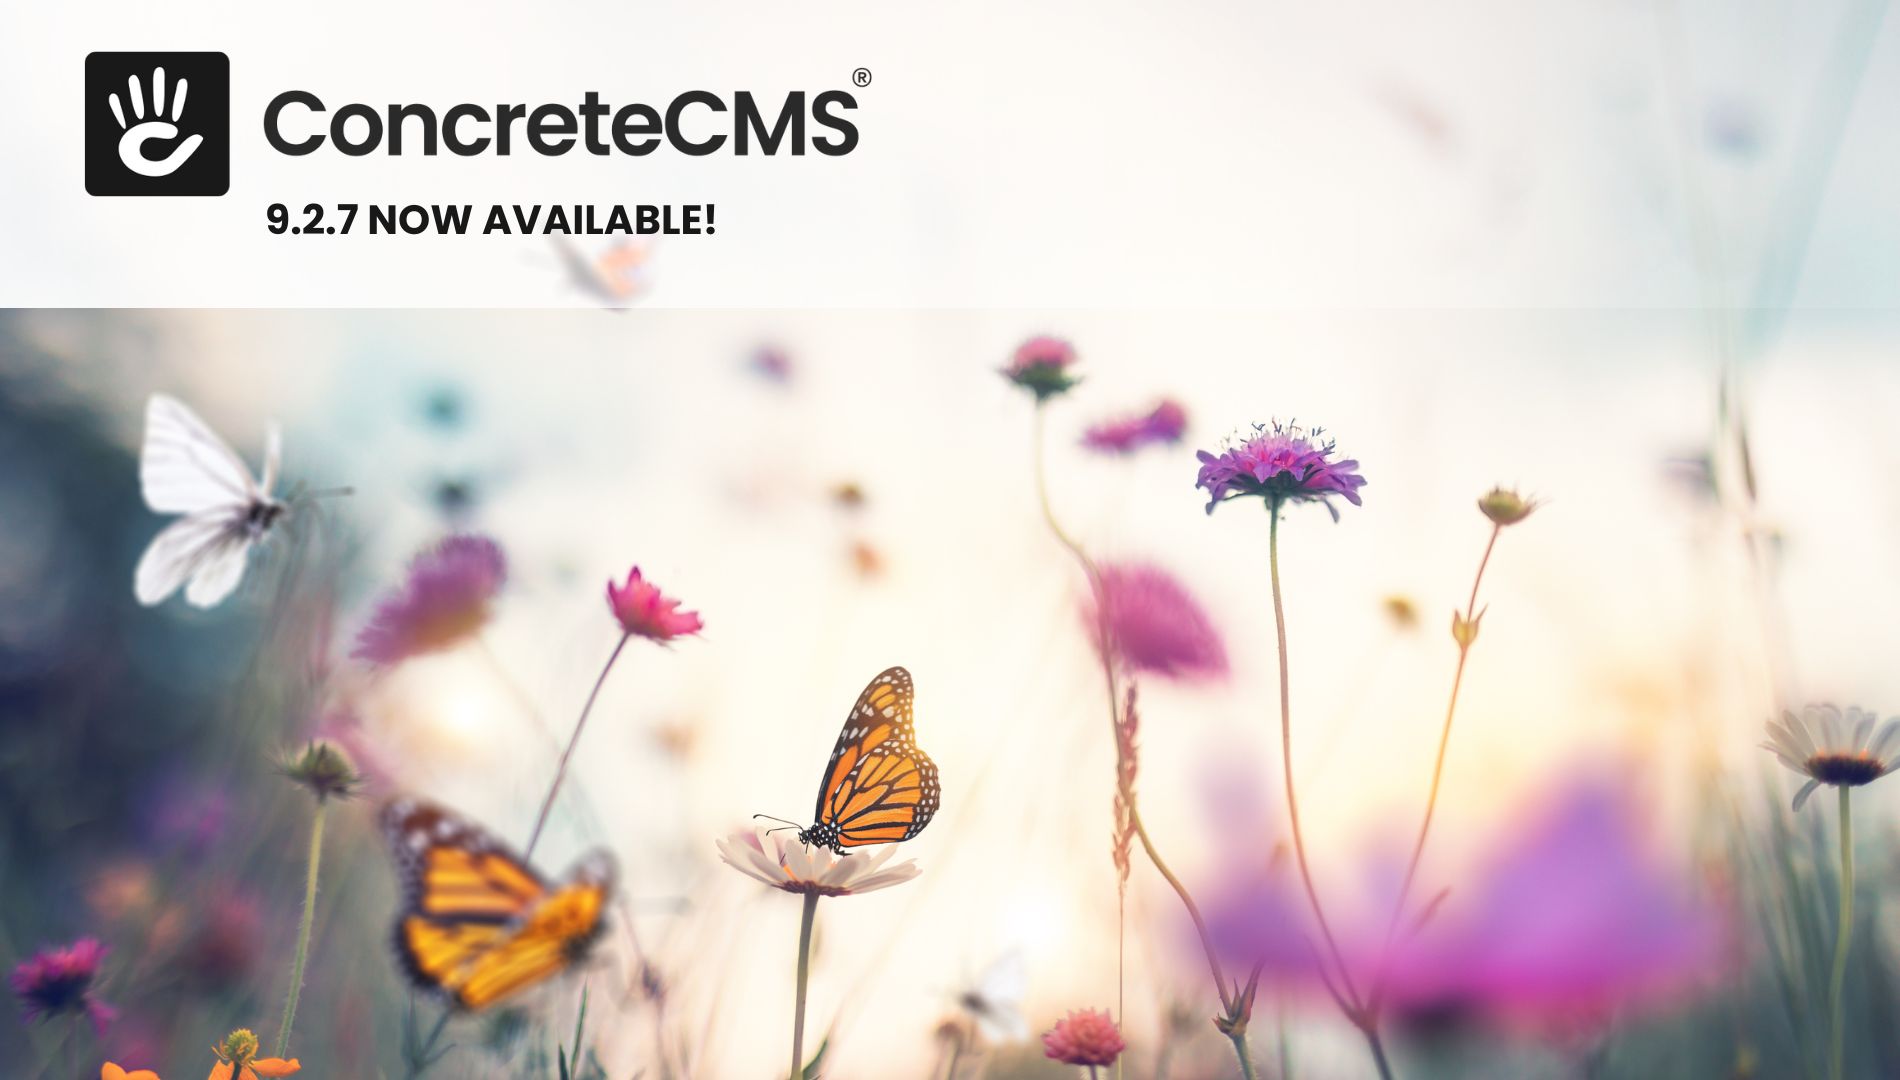 Concrete CMS 9.2.7 is Now Available!